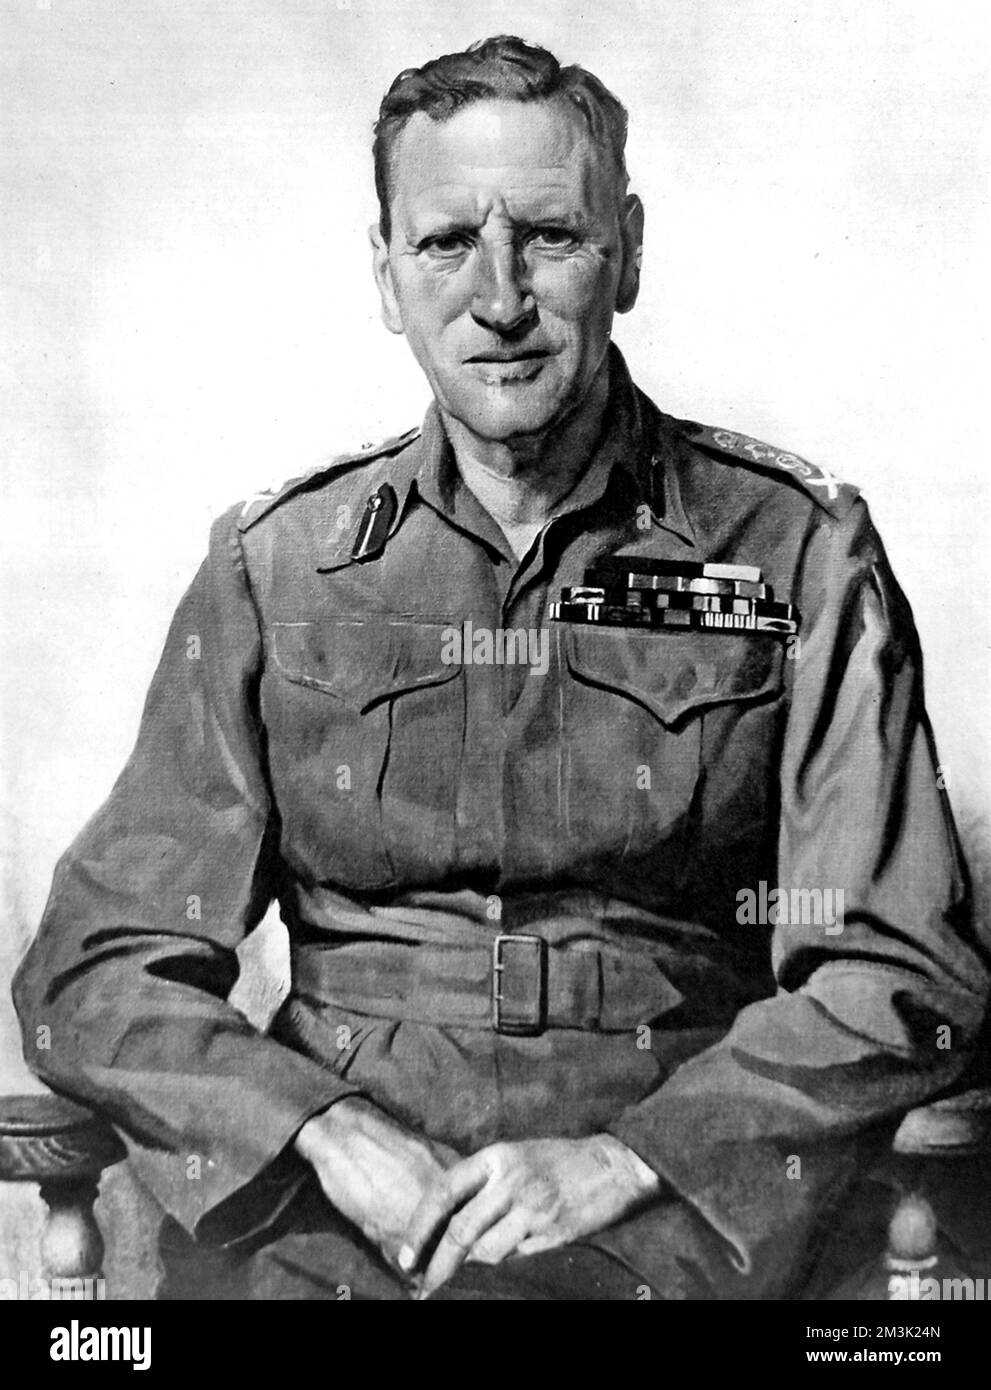 Portrait of Sir Claude John Eyre Auchinleck, the English soldier who was made Field-Marshal in 1946, pictured in 1945 when he was Commander-in-Chief in India.     Date: 1945 Stock Photo